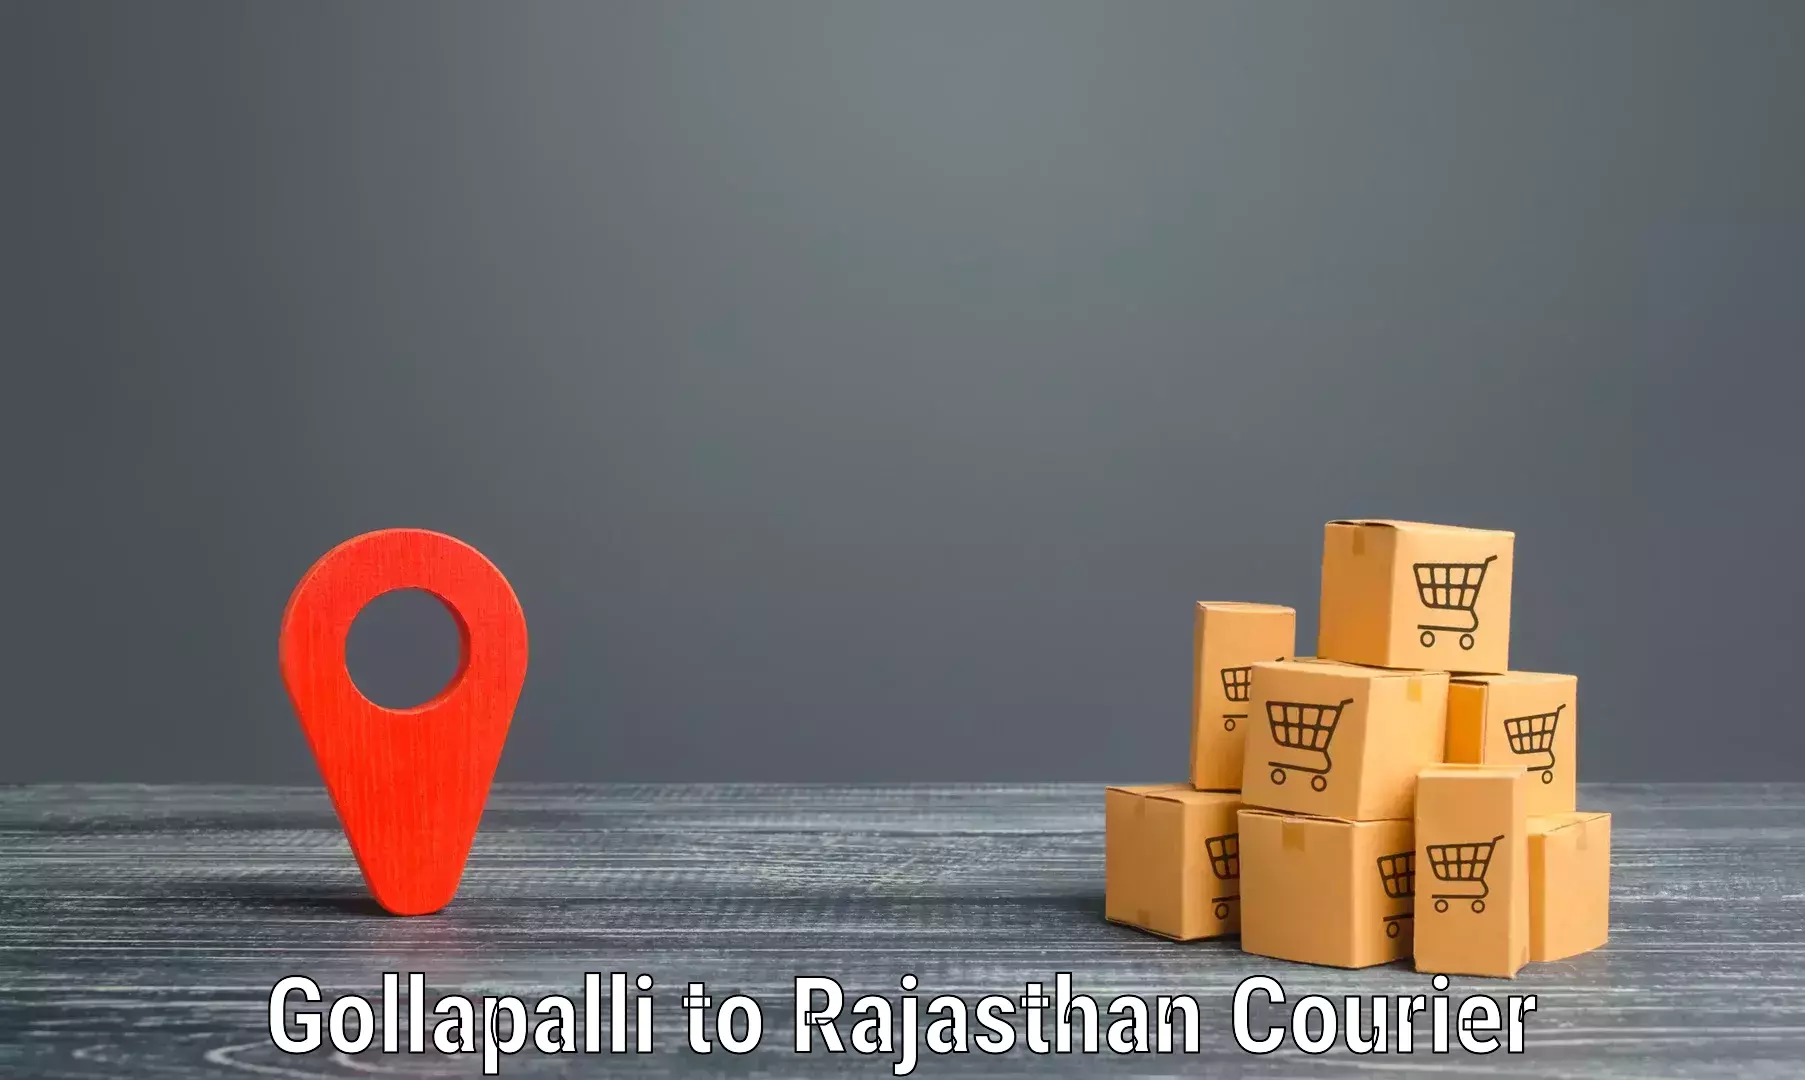 Package delivery network Gollapalli to Sanchore